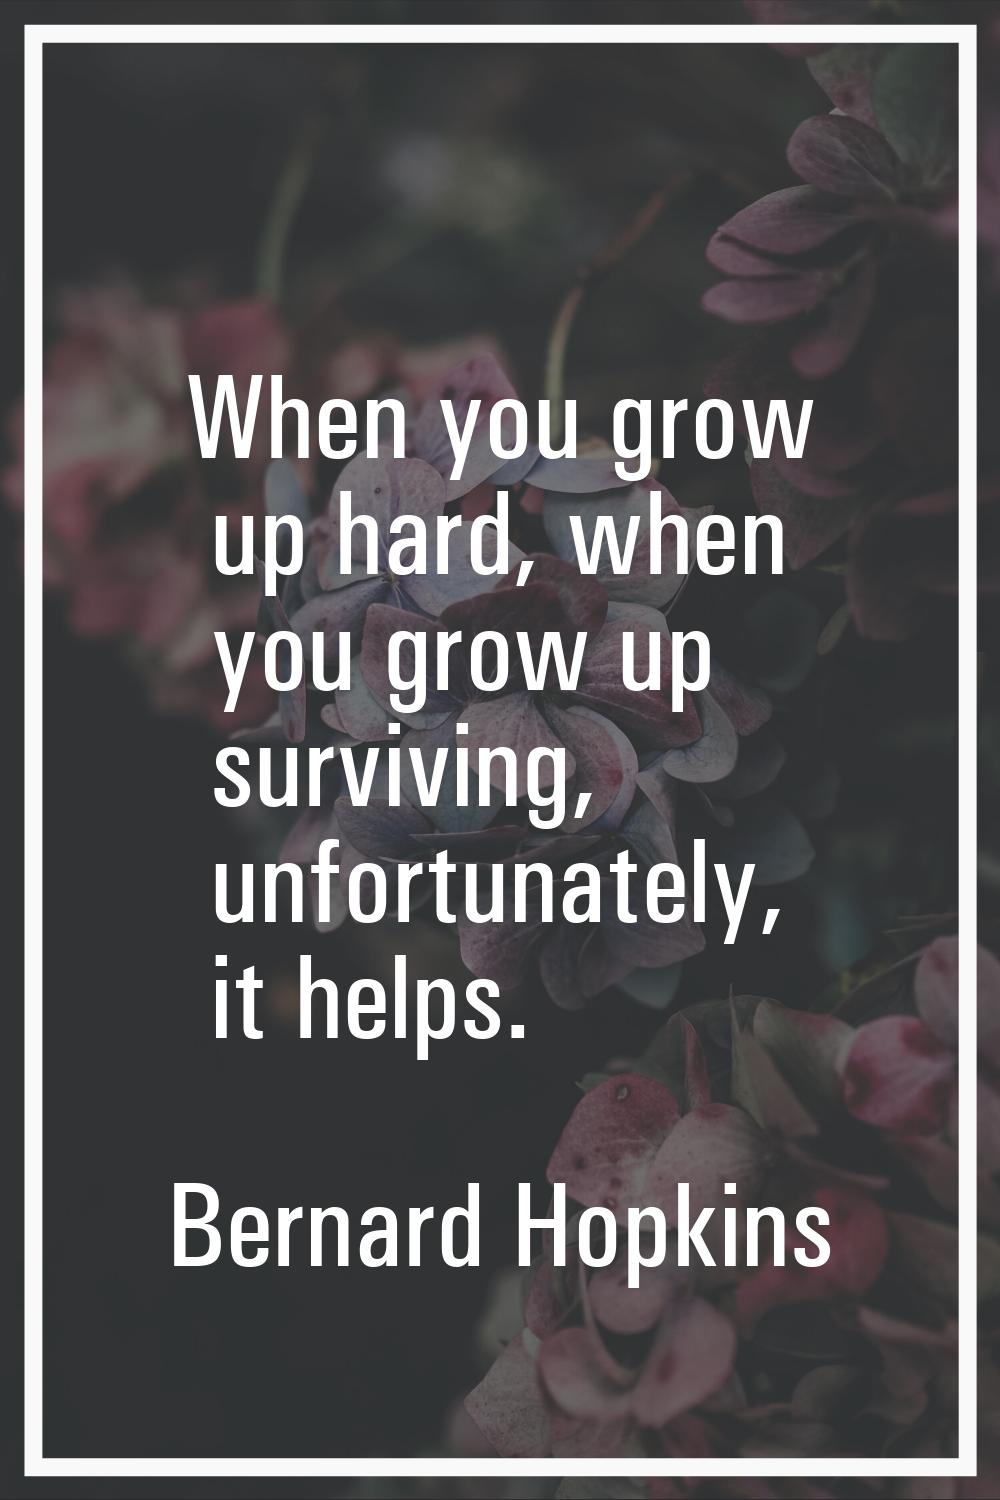 When you grow up hard, when you grow up surviving, unfortunately, it helps.